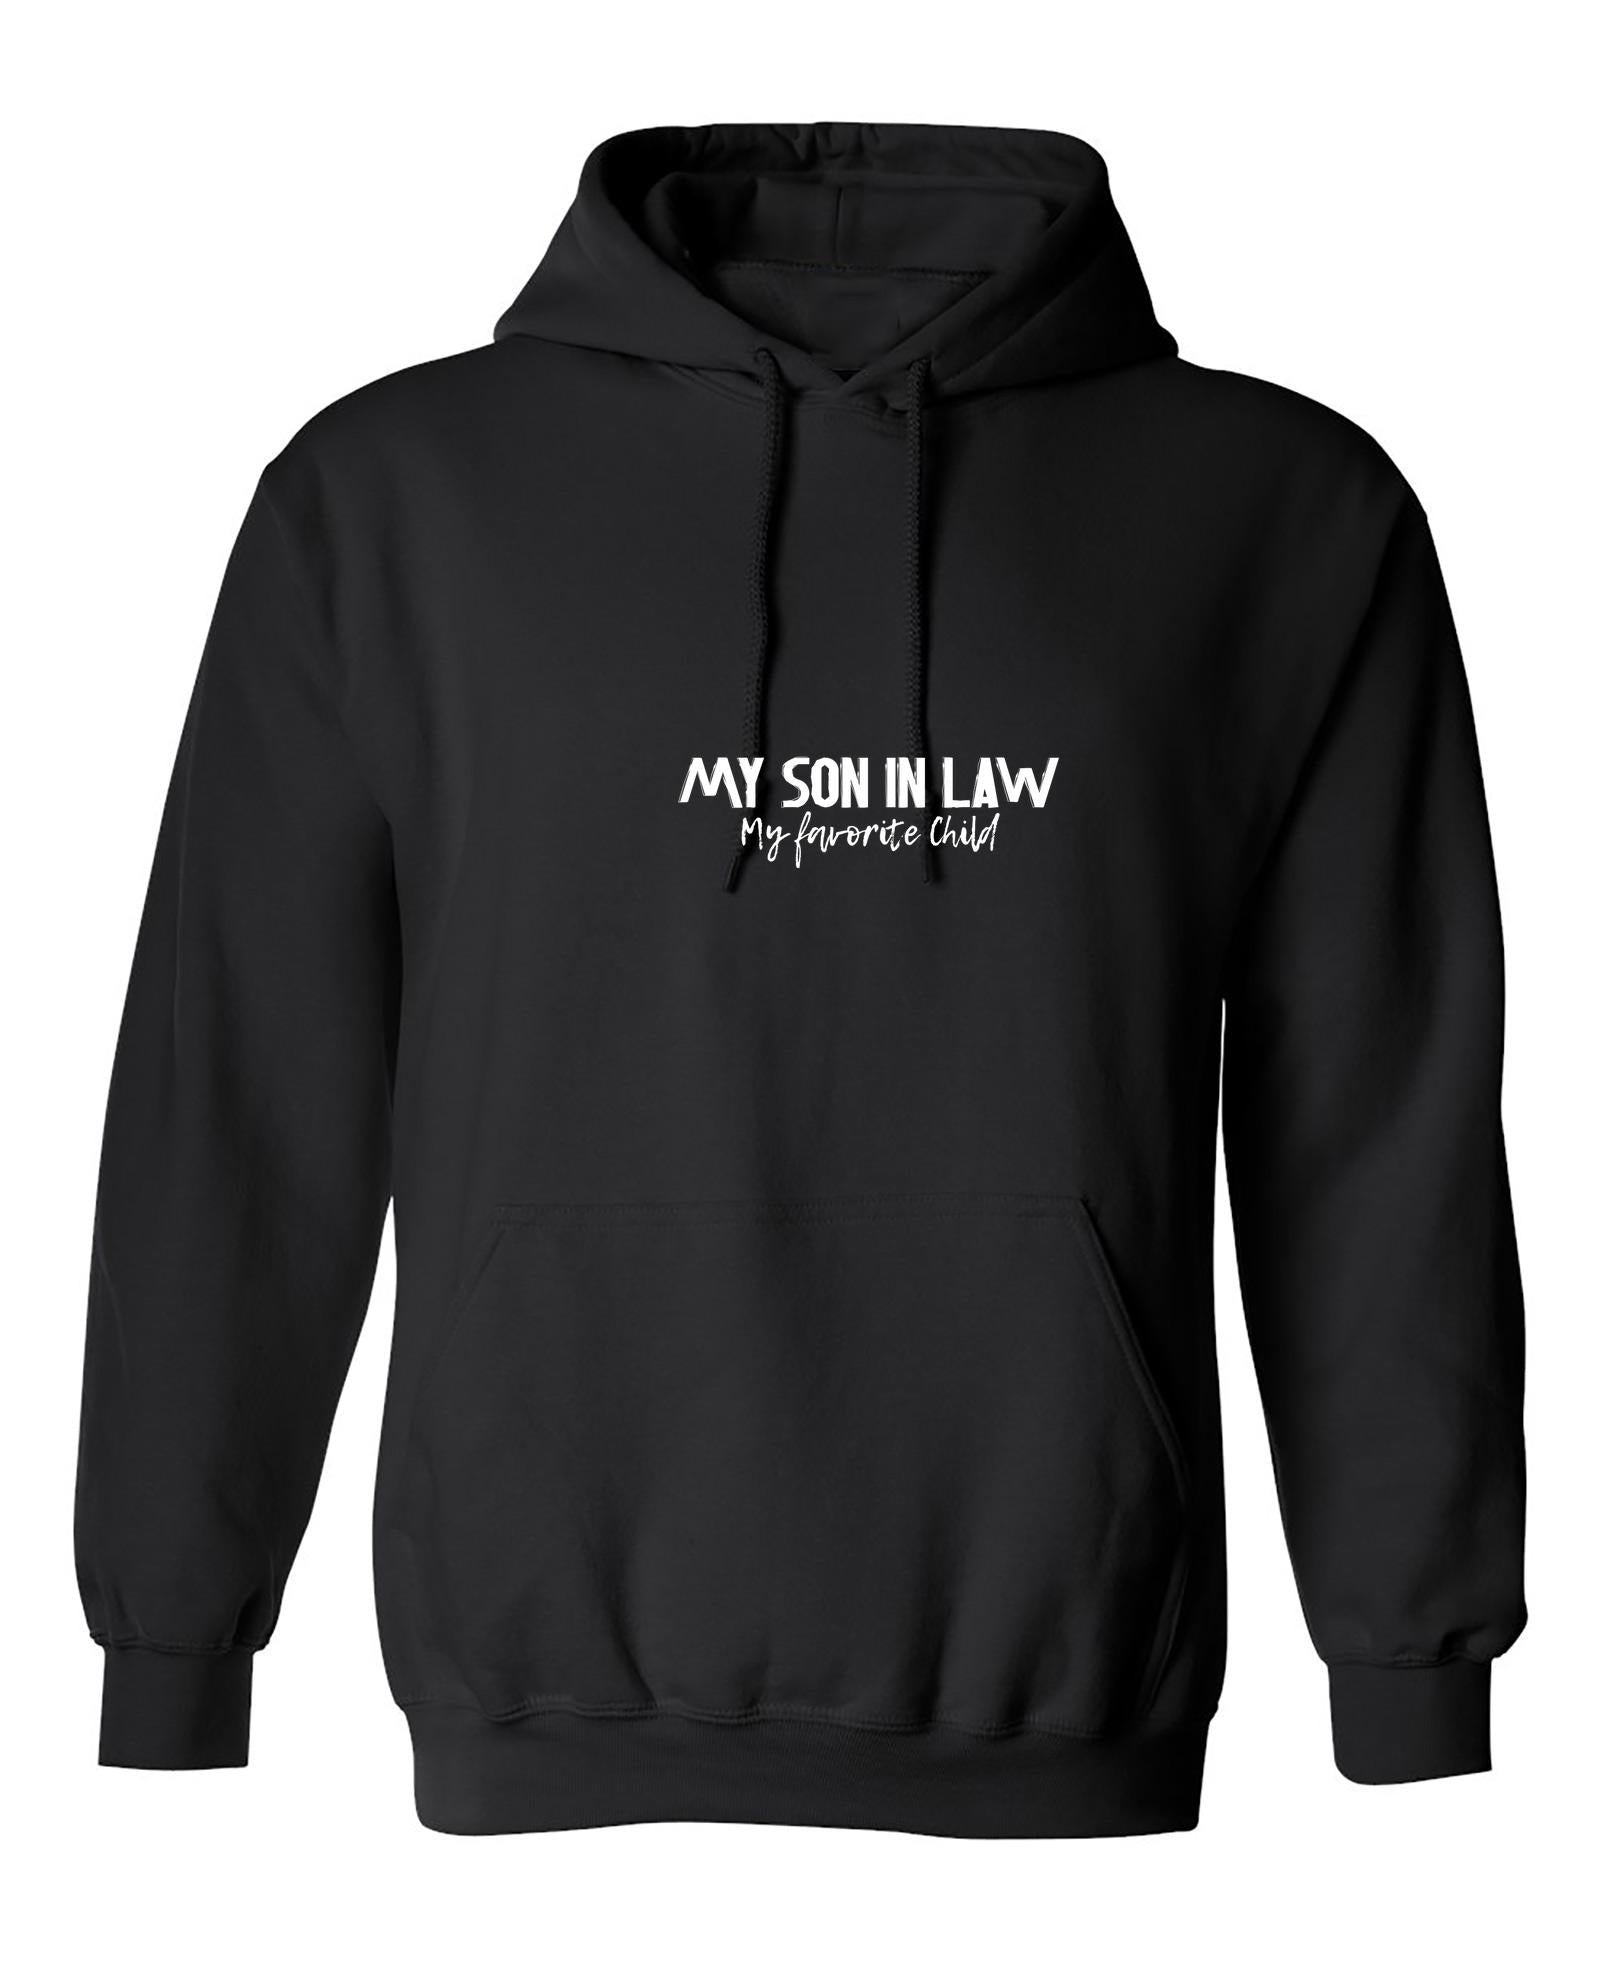 Funny T-Shirts design "My Son in Law, My Favorite Child Funny Shirt"